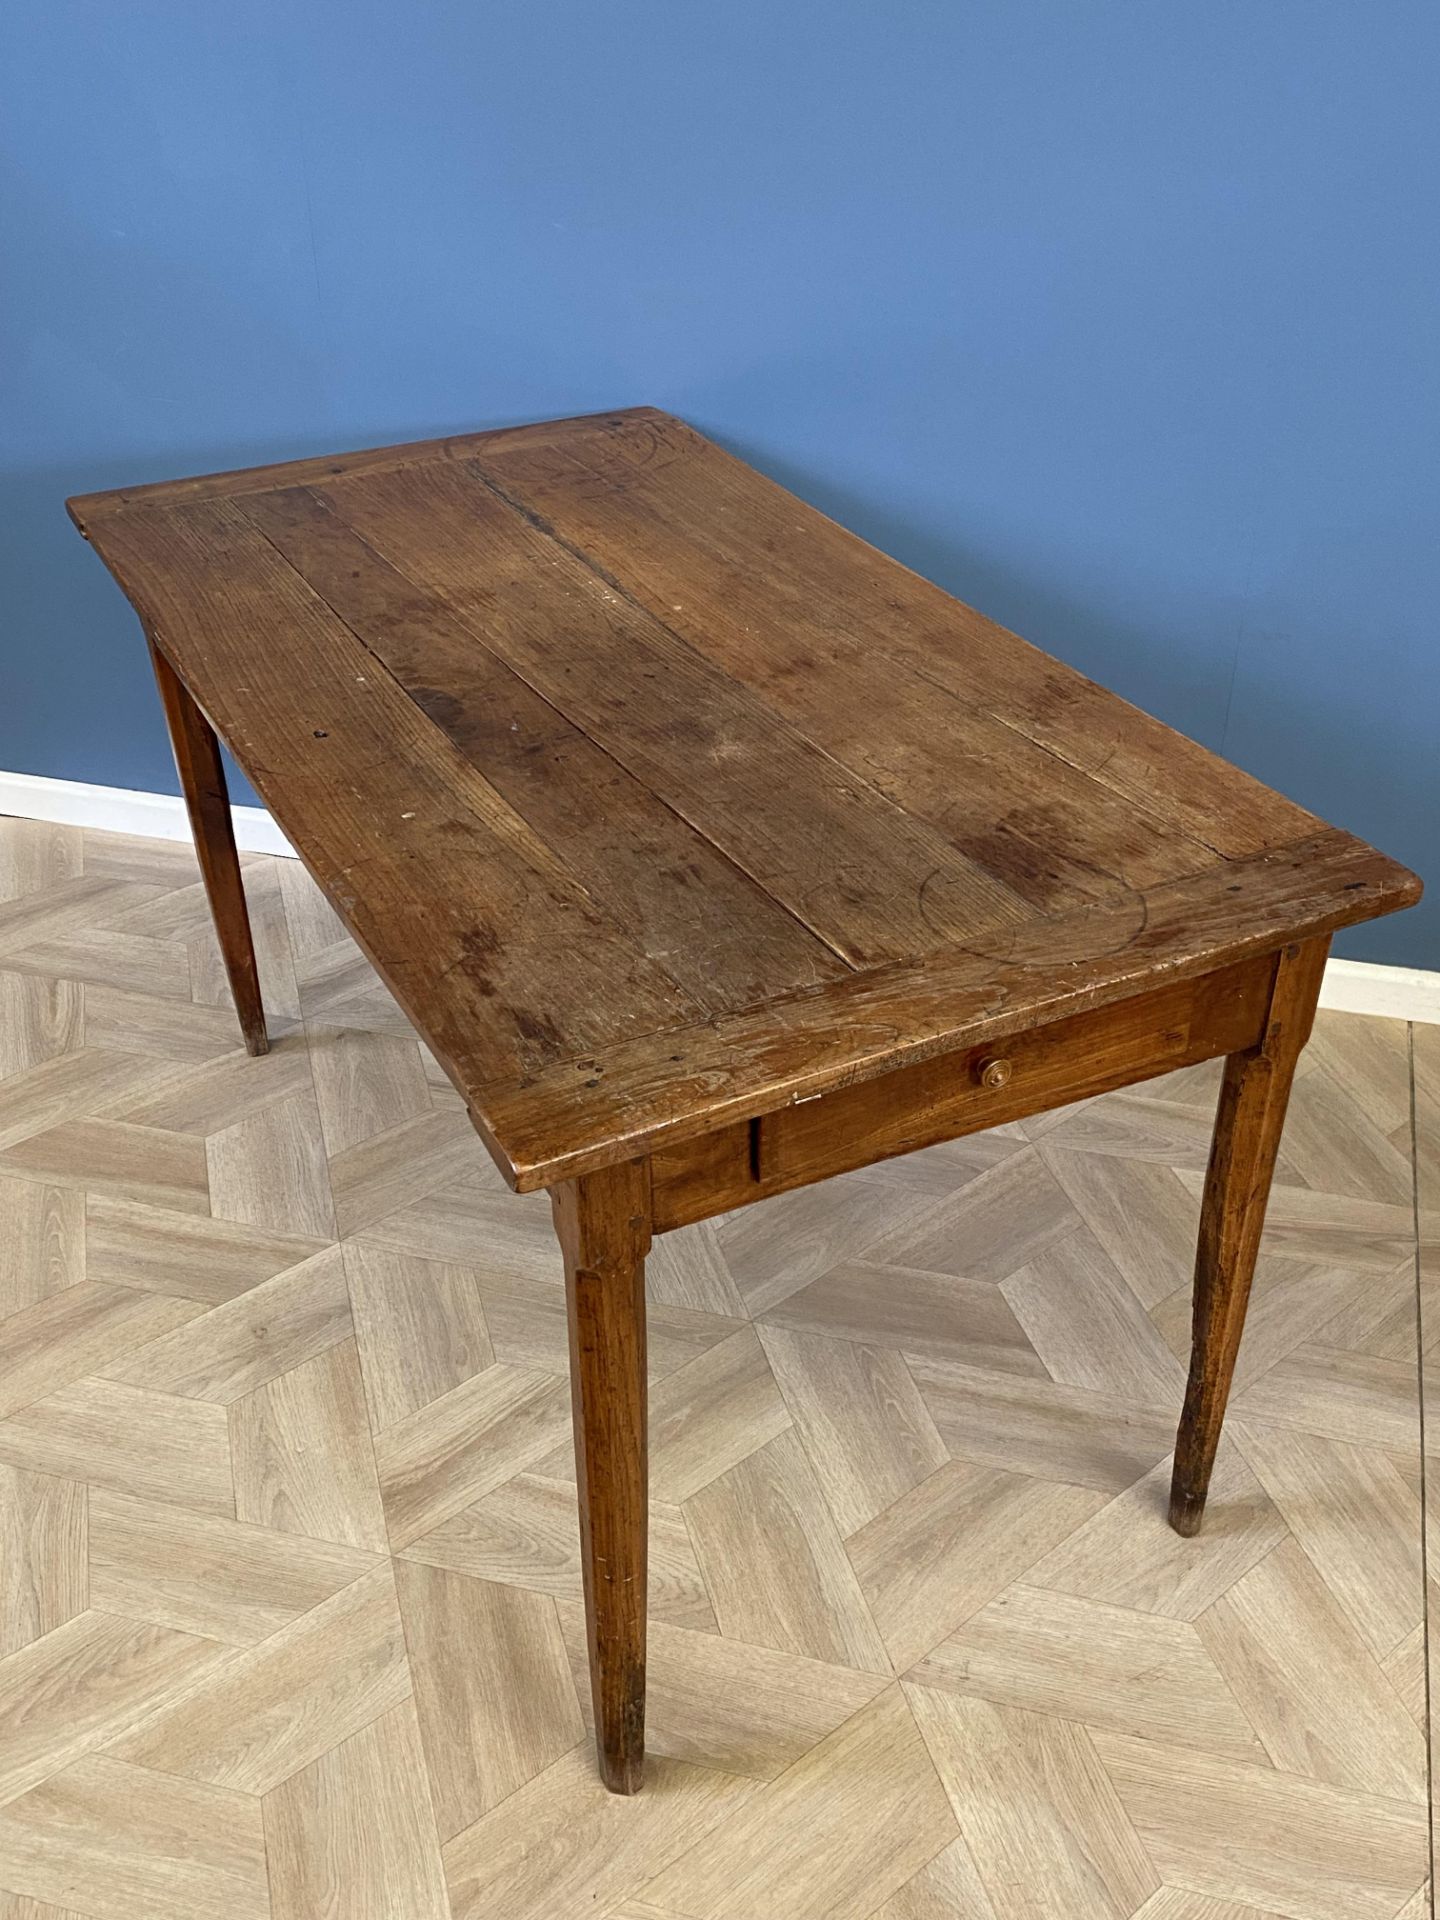 Early 19th century French fruitwood farmhouse table - Image 2 of 6